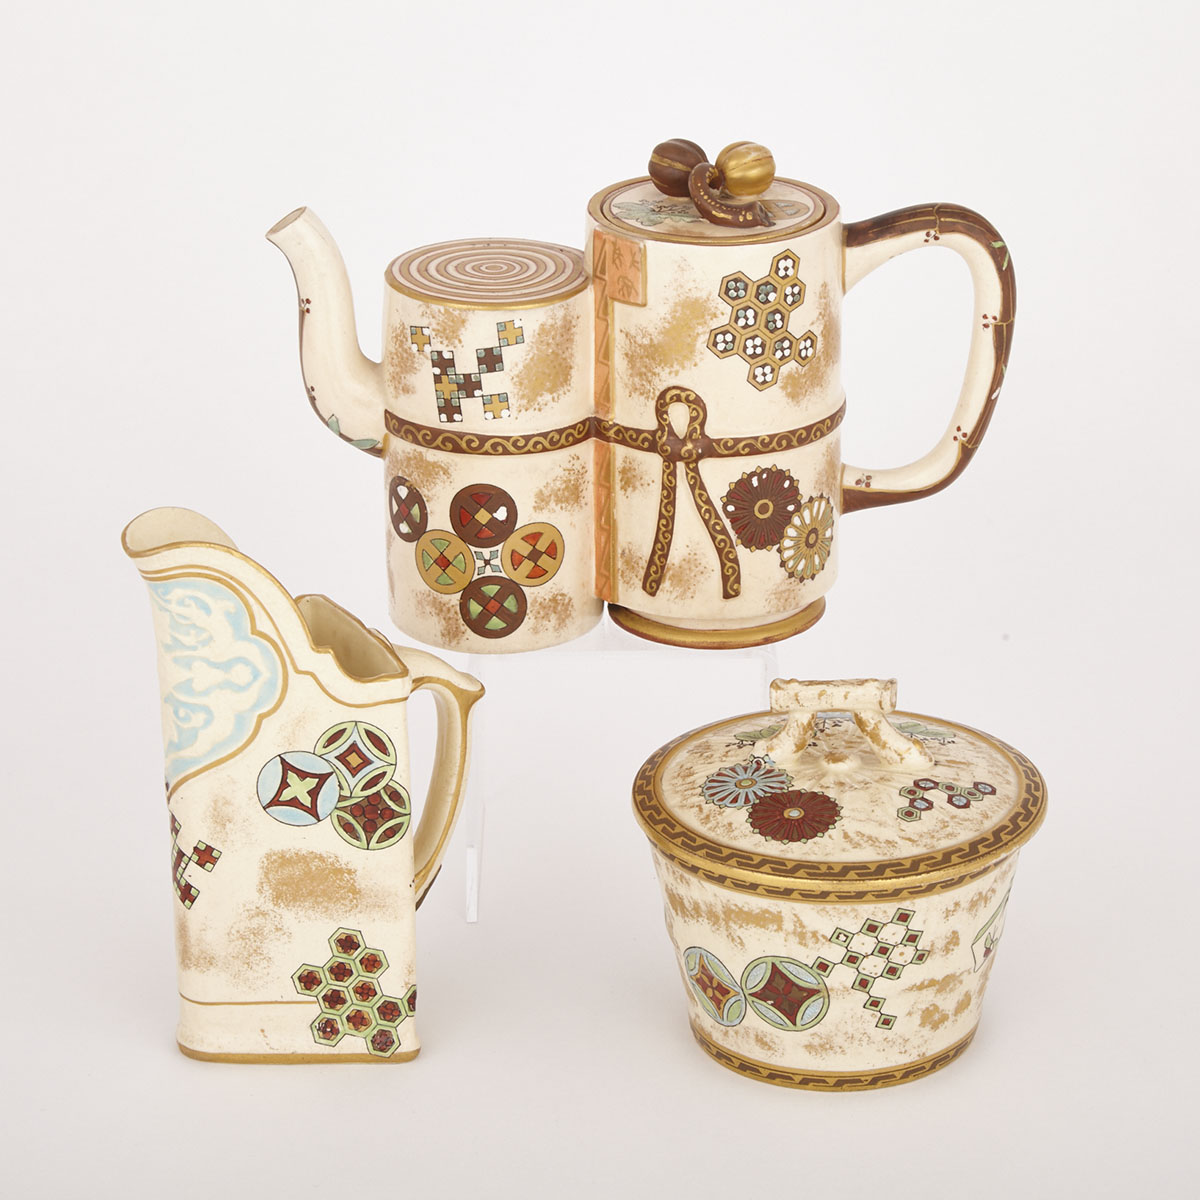 Worcester Aesthetic Movement Teapot, Cream Jug and Covered Sugar Bowl, late 19th century